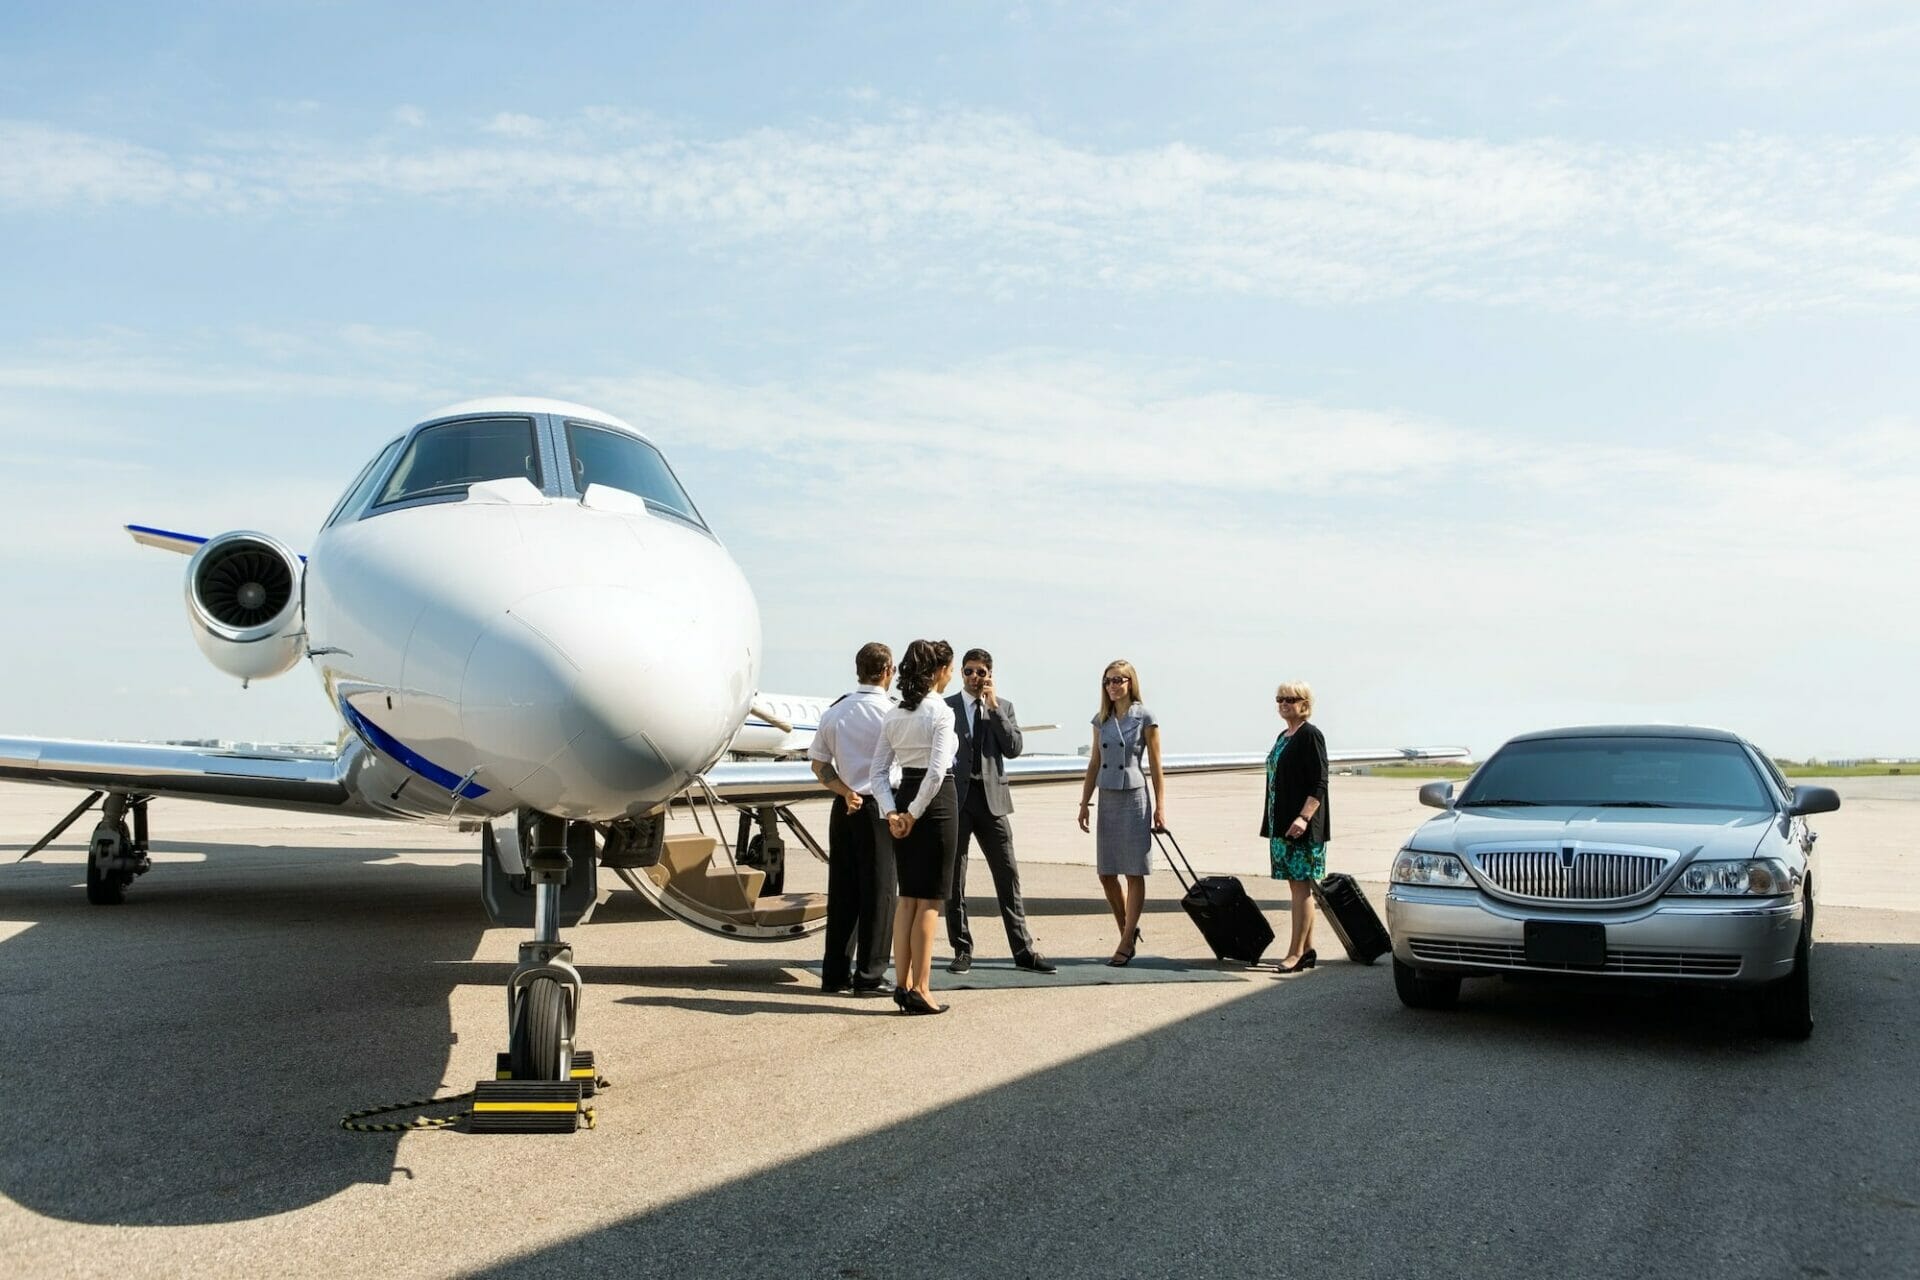 Group of passengers boarding a private jet from limo on the tarmac